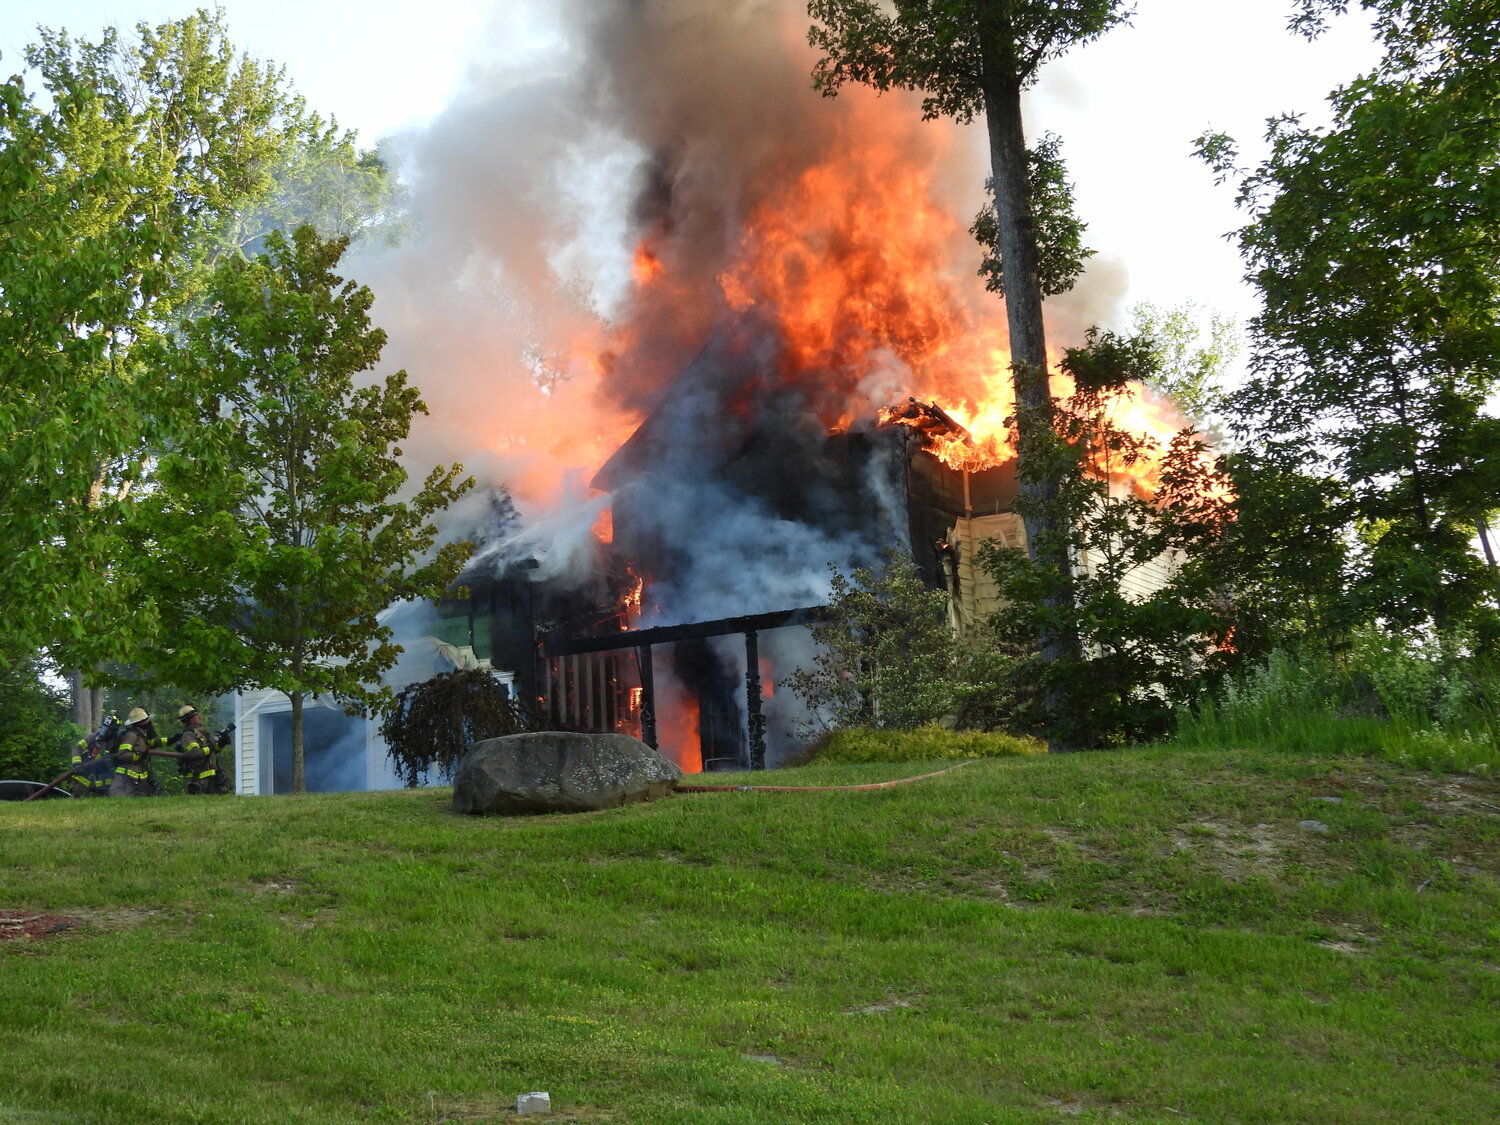 Firefighters battled a blaze Thursday on Copper Rock Road in the Town of Newburgh